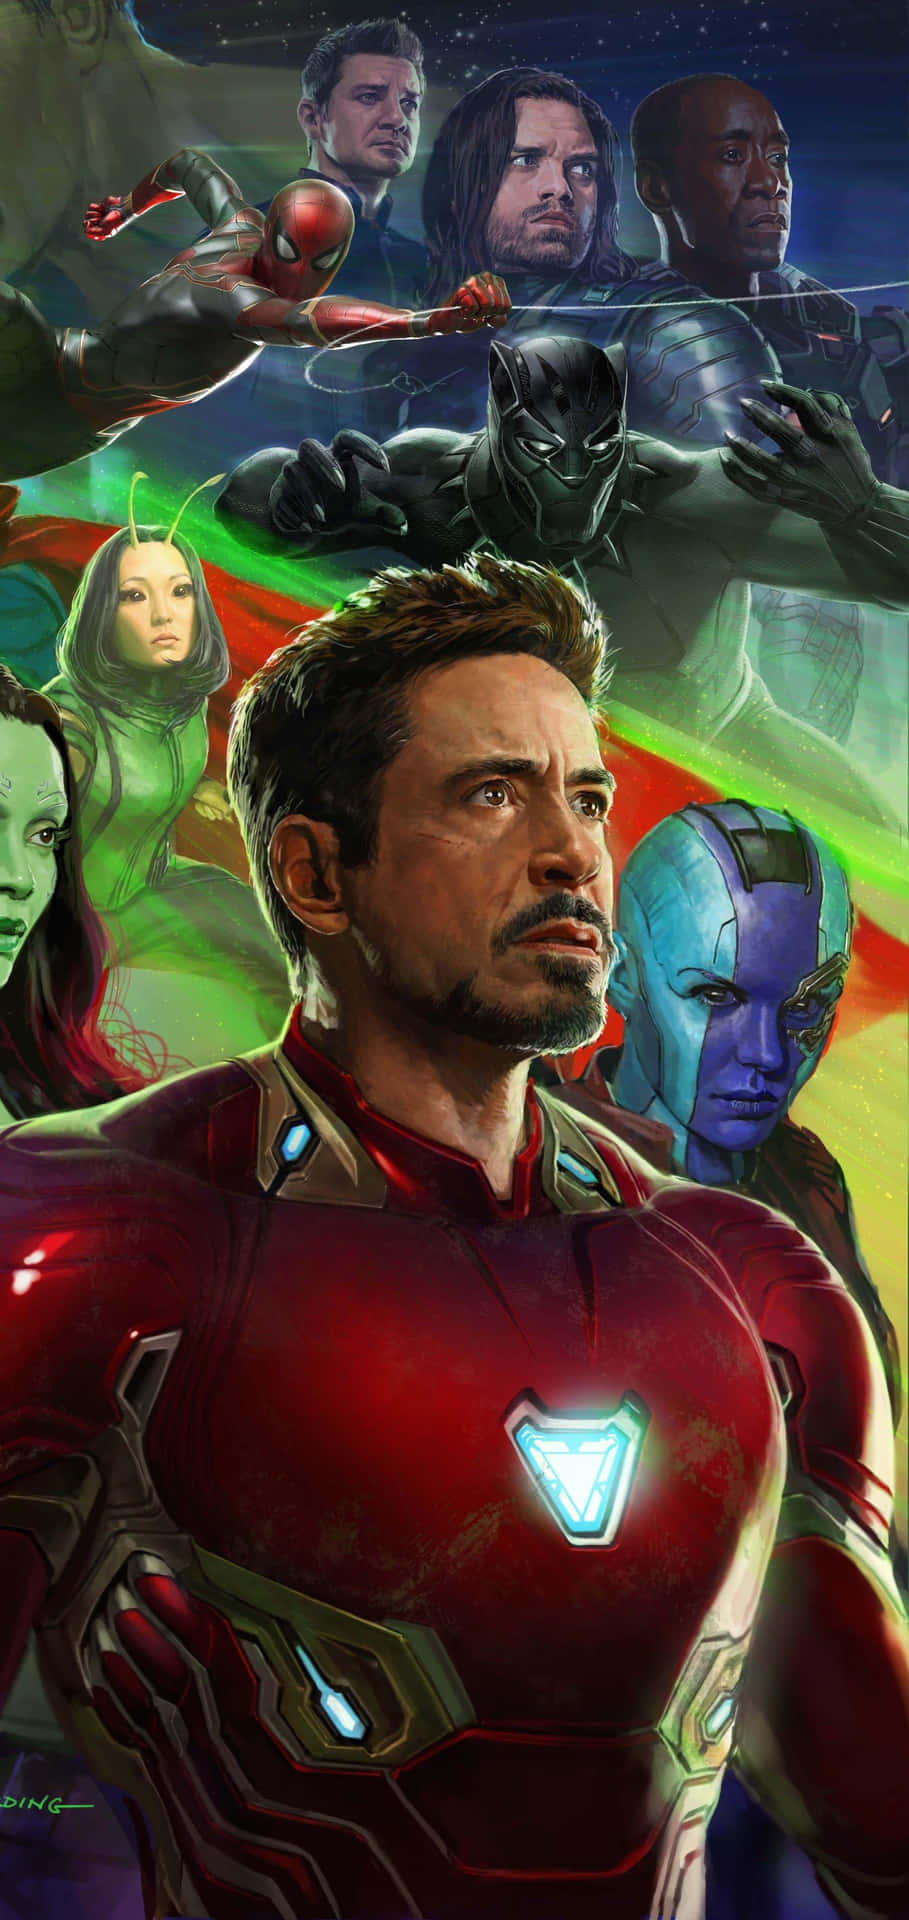 Iron Man and Doctor Strange team up to defeat Thanos in Avengers: Infinity War Wallpaper